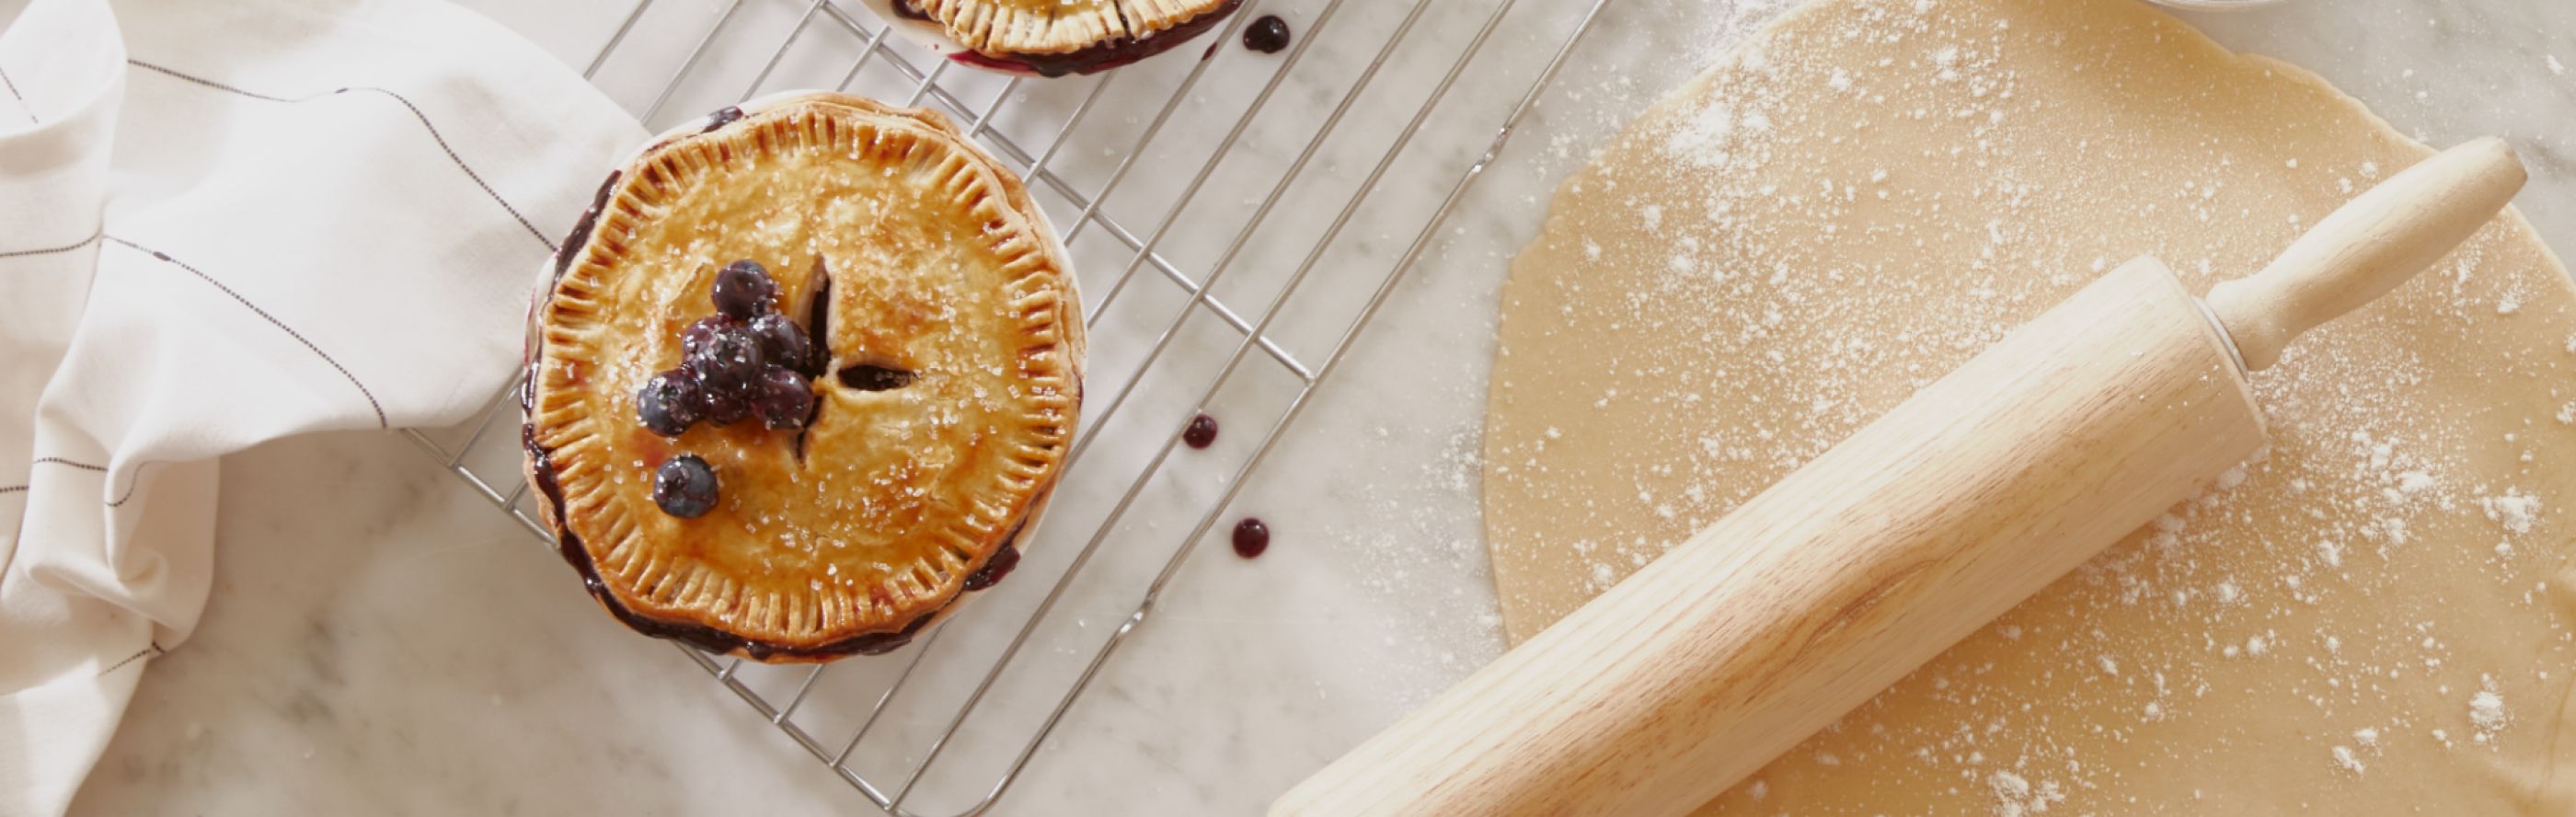 A blueberry pie next to a rolling pin and flour.